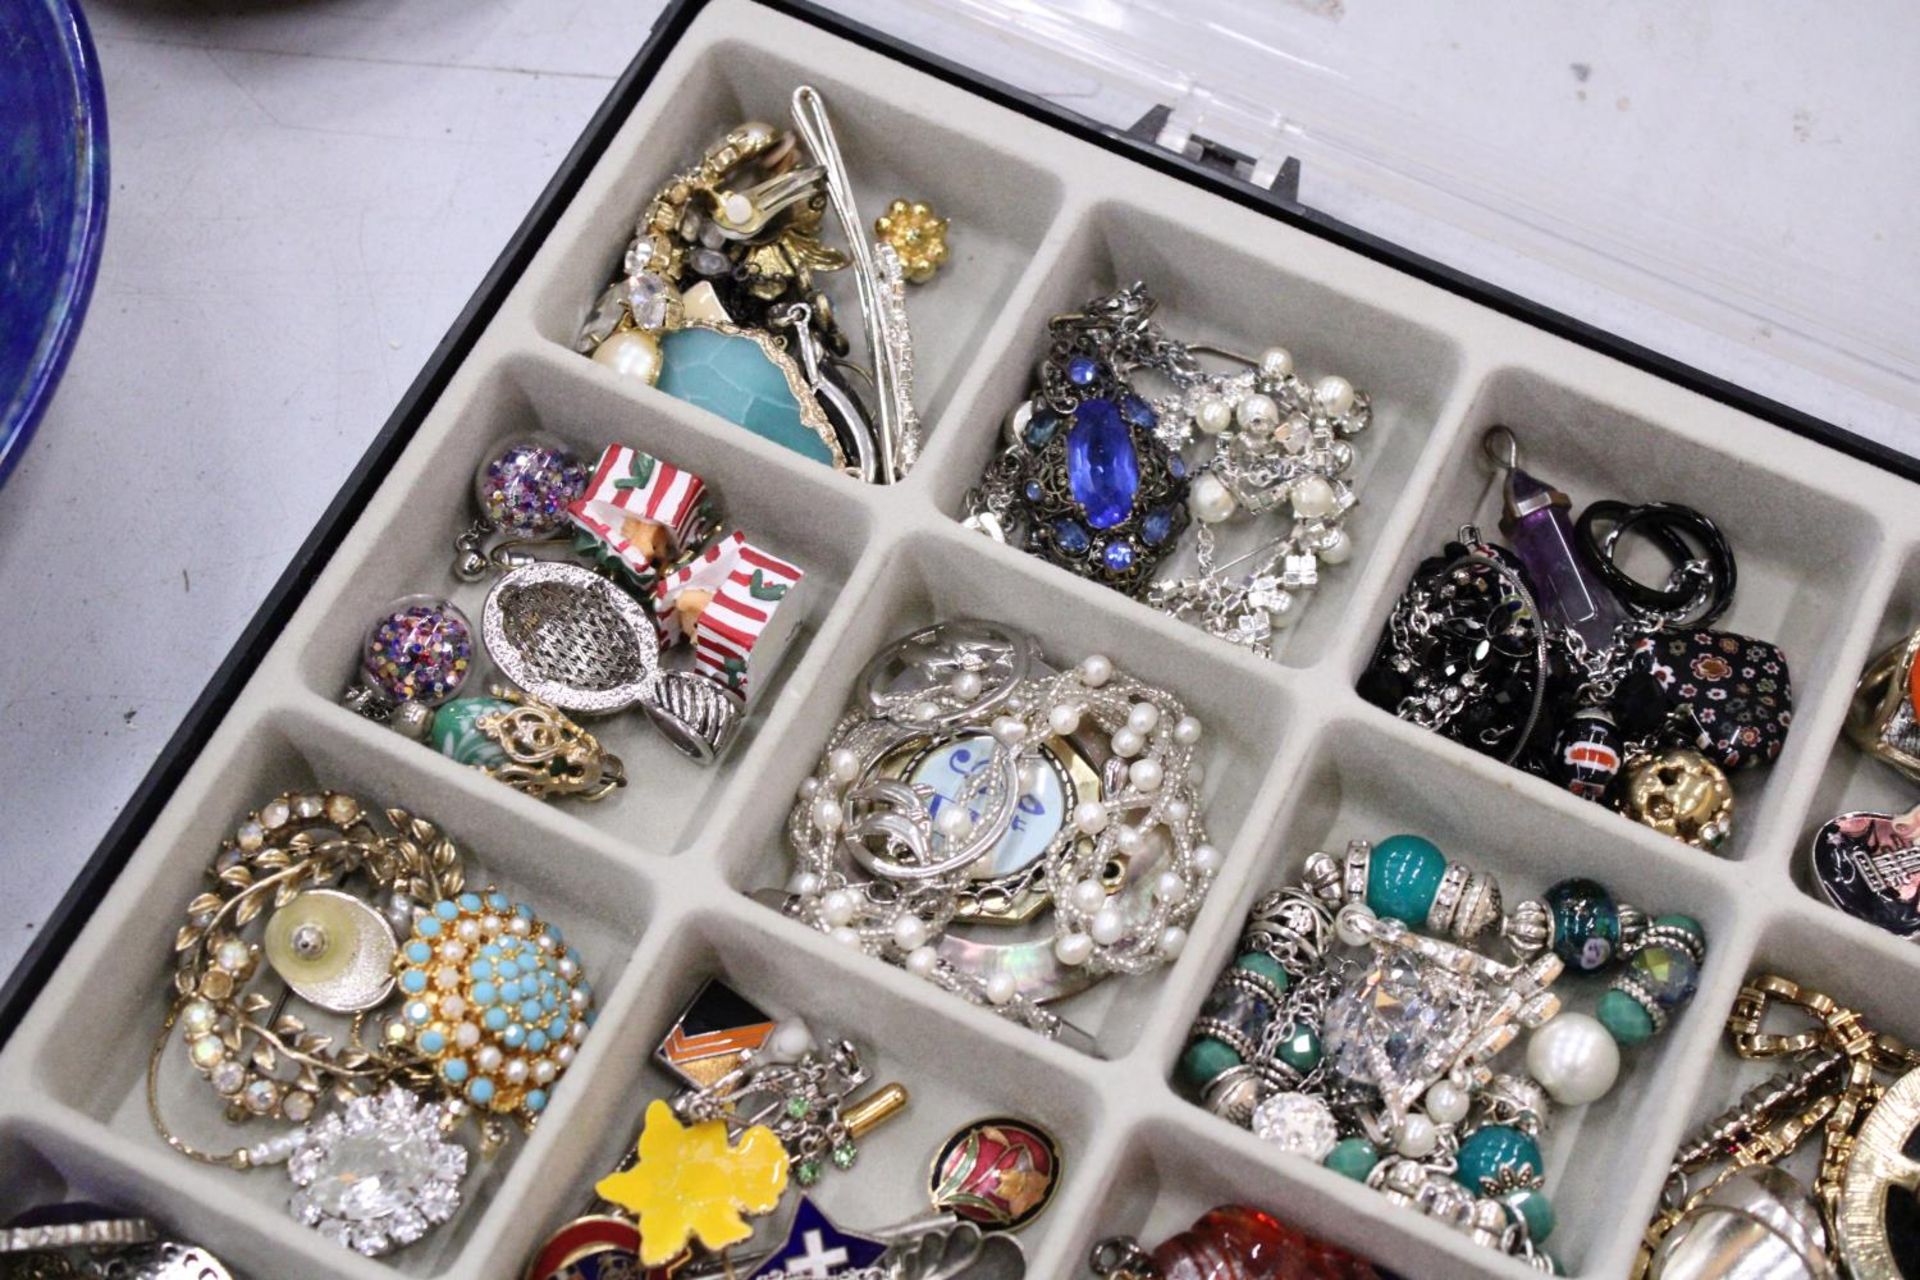 A QUANTITY OF COSTUME JEWELLERY IN DISPLAY CASE - Image 2 of 5